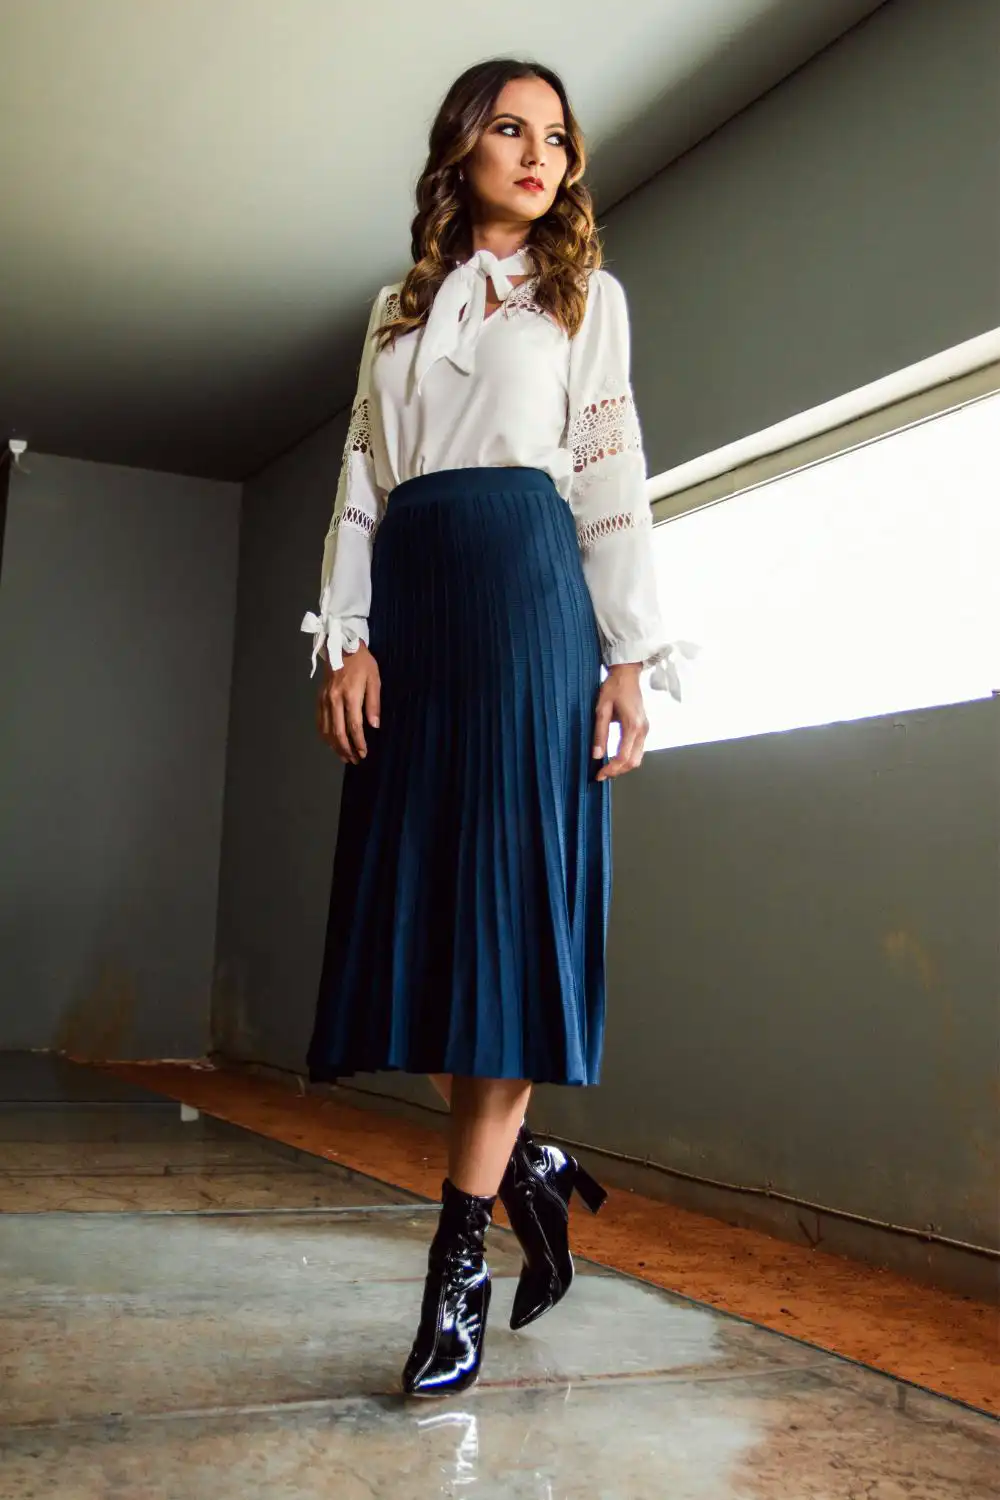 Woman Wearing White Long-sleeved Shirt and Long Blue Skirt